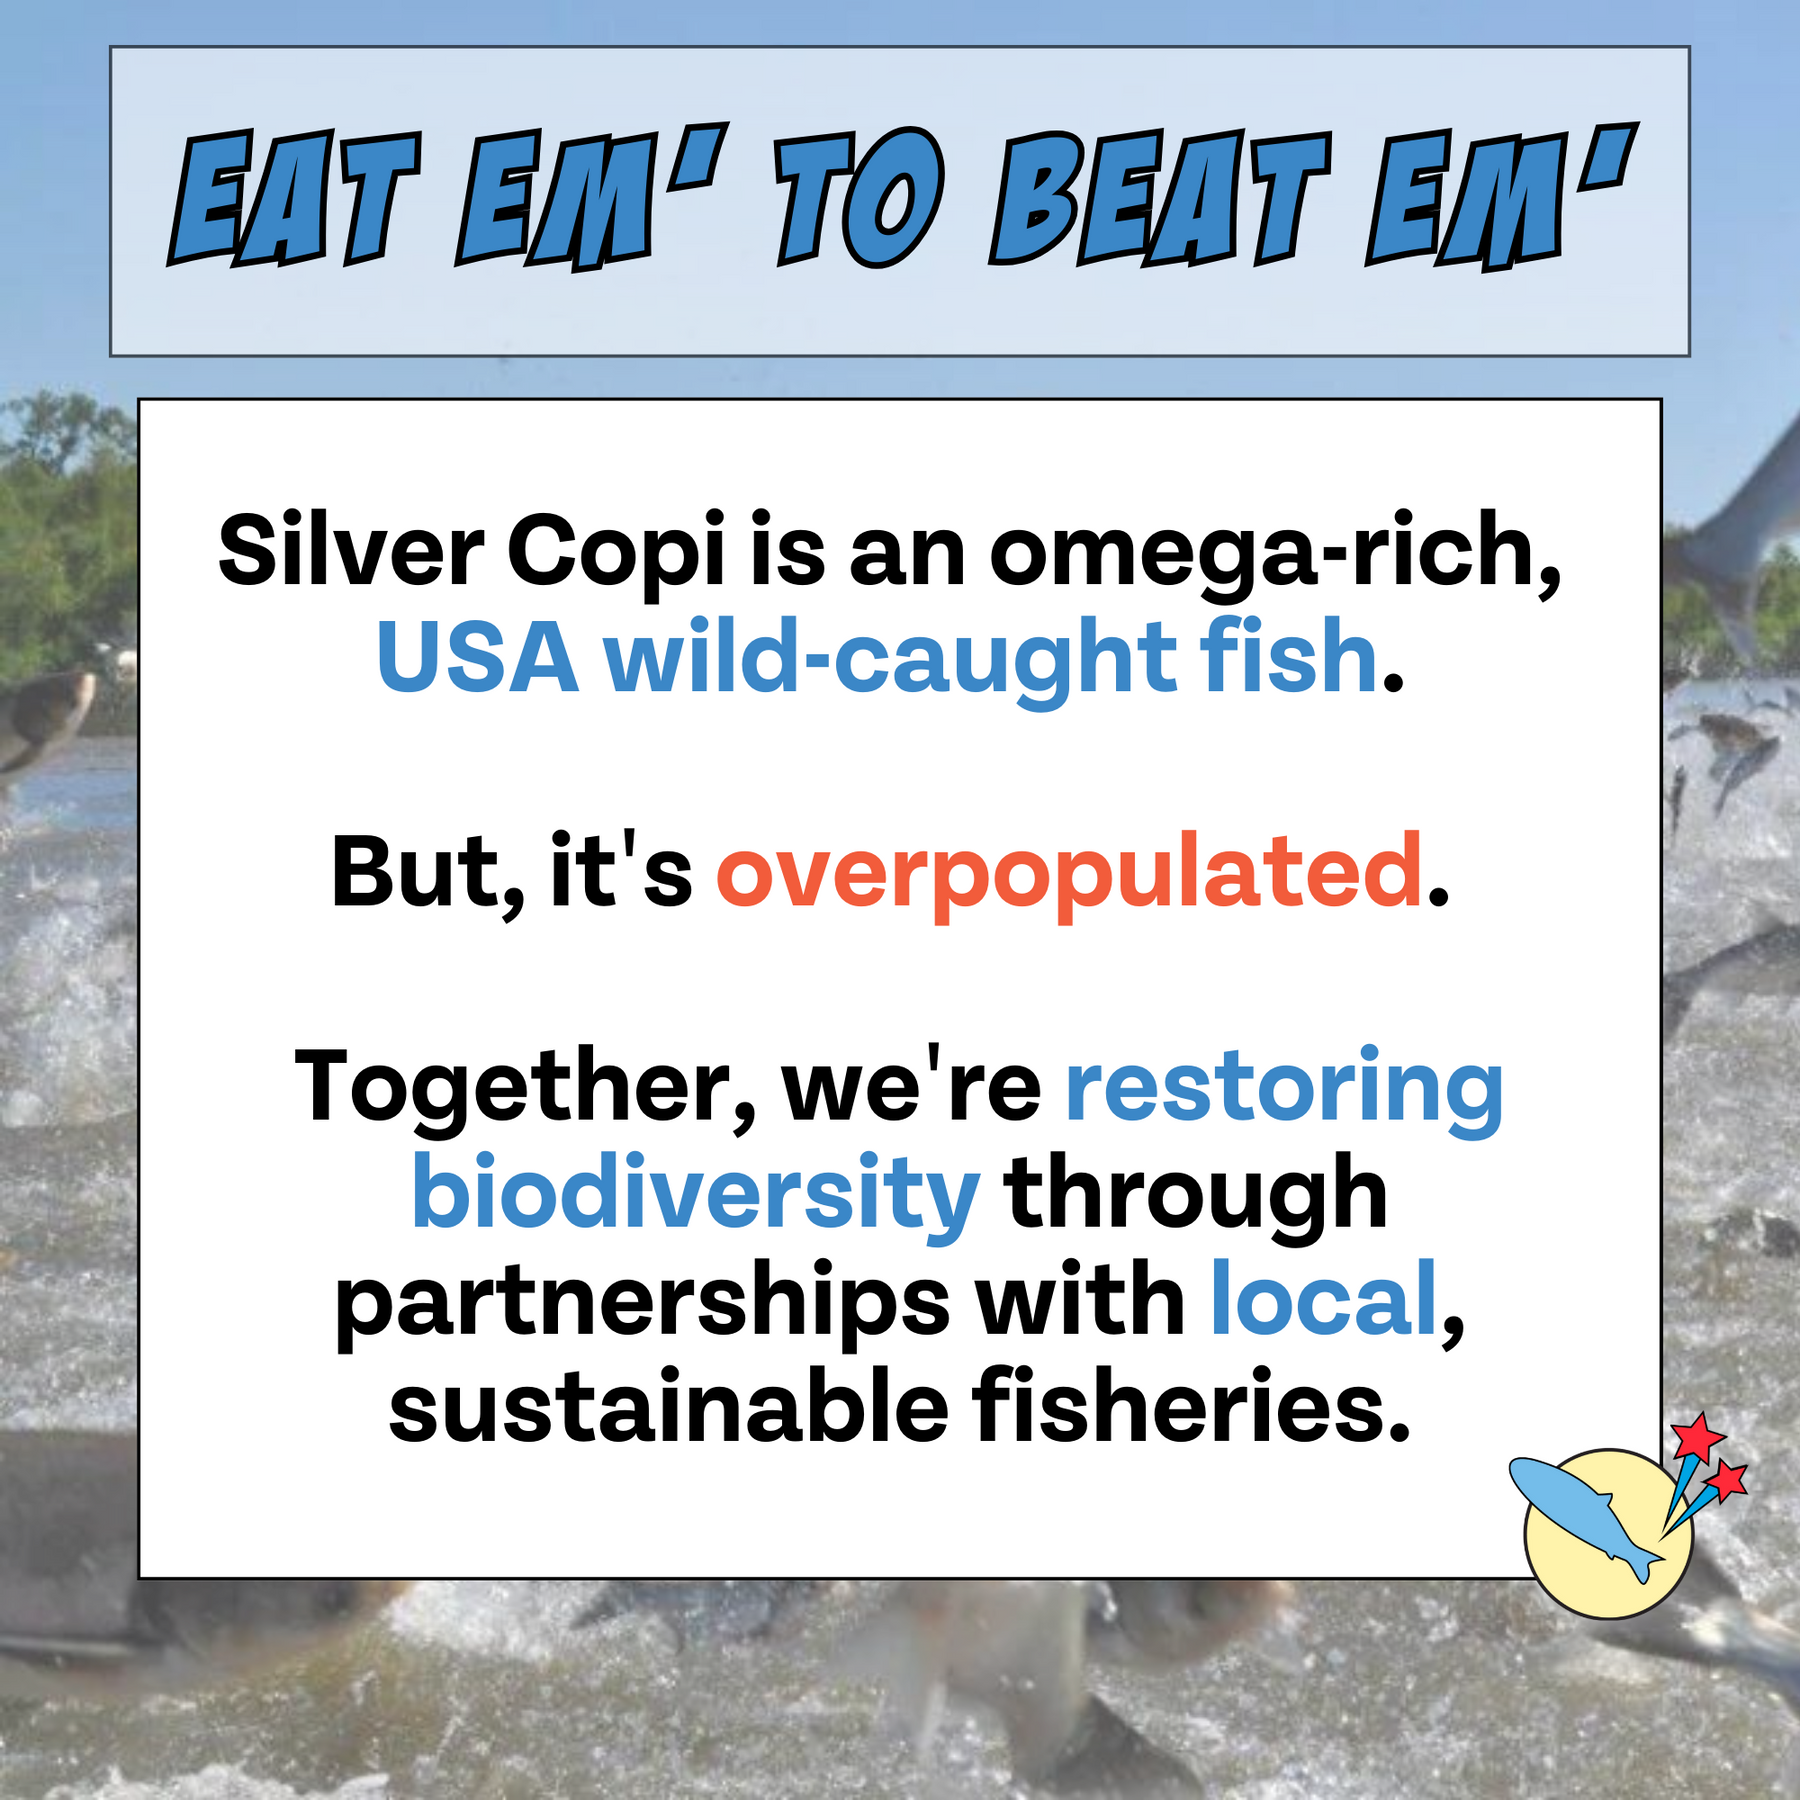 Copy says silver copi is an omega-rich USA wild-caught fish. But it's overpopulated. Together, we're restoring biodiversity through partnerships with local, sustainable fisheries.